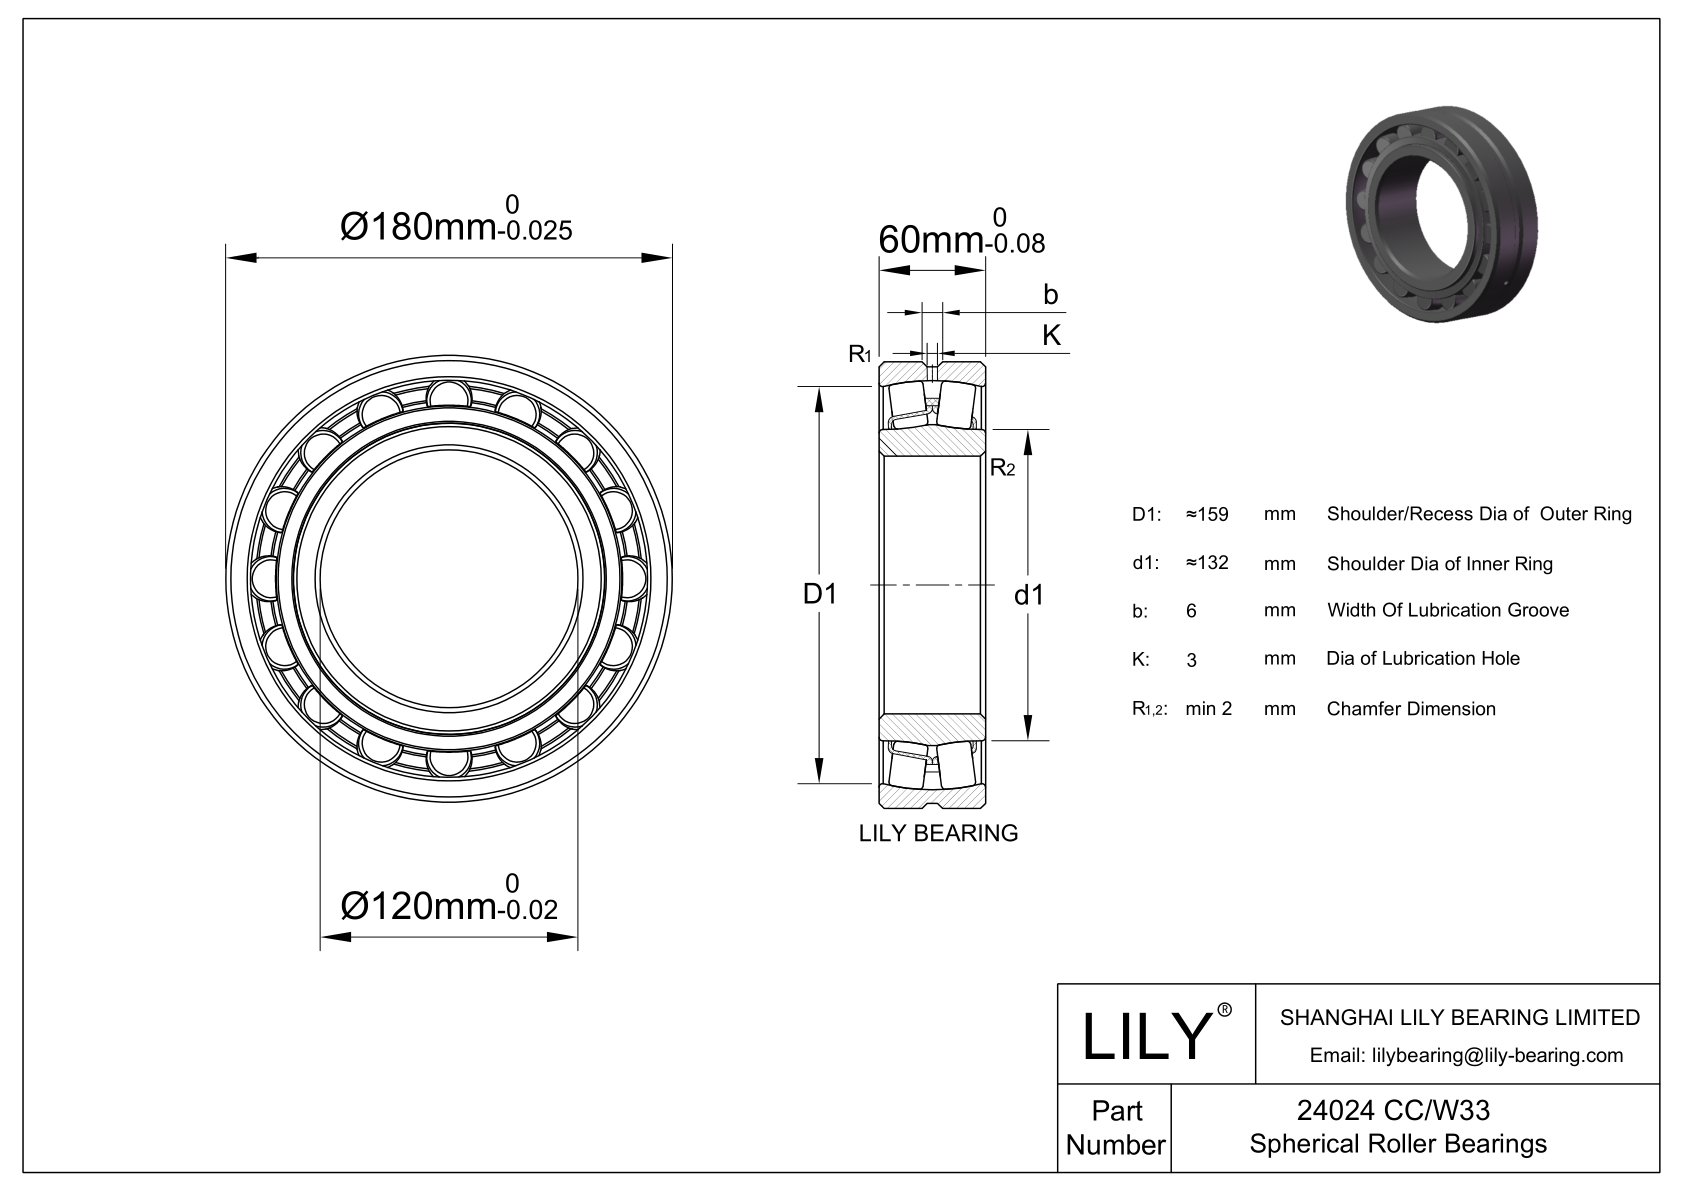 24024 CC/W33 Double Row Spherical Roller Bearing cad drawing